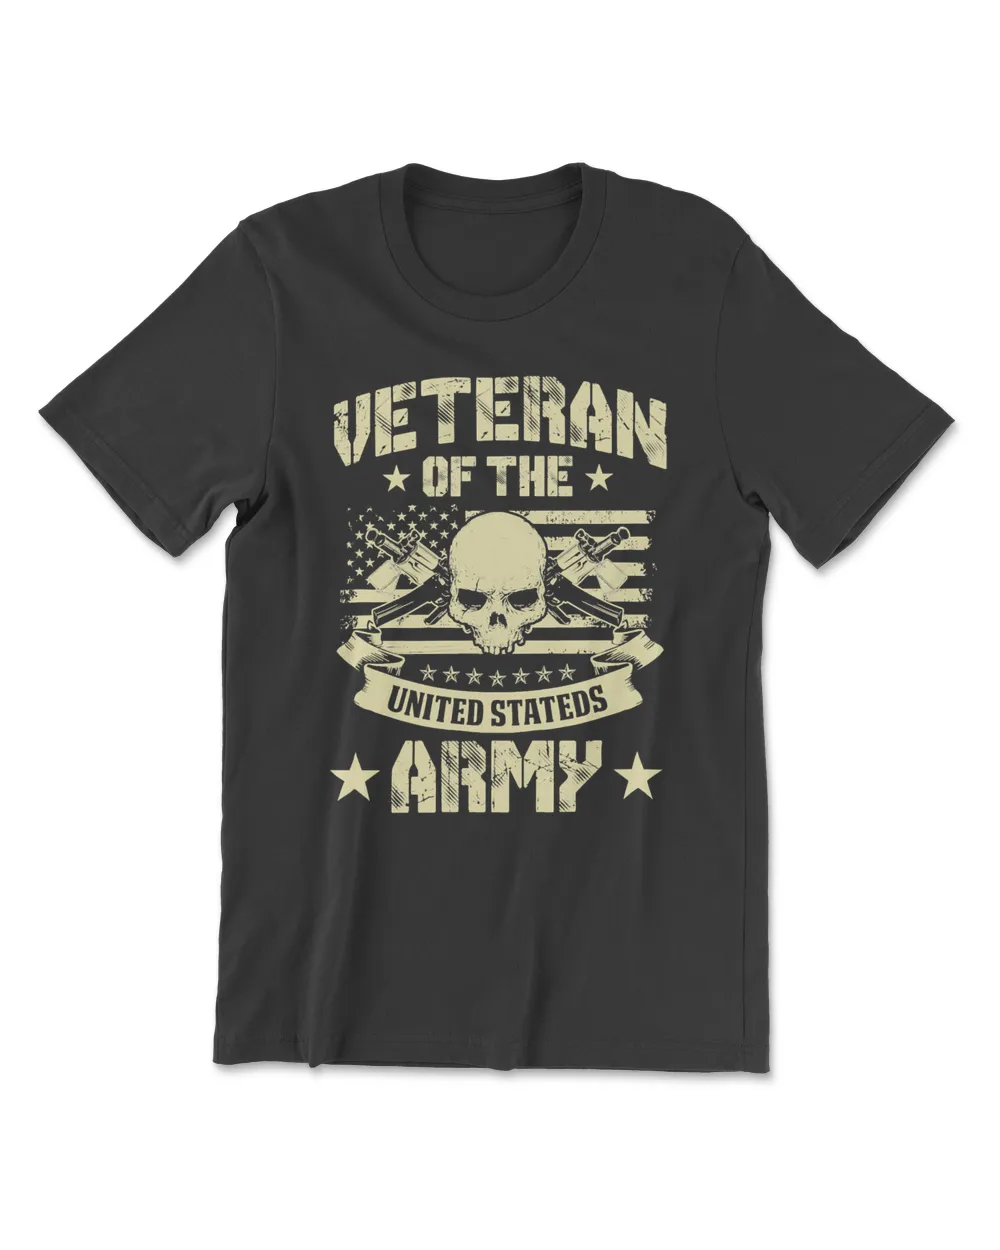 Veteran Veteran of the US Army 88 navy soldier army military